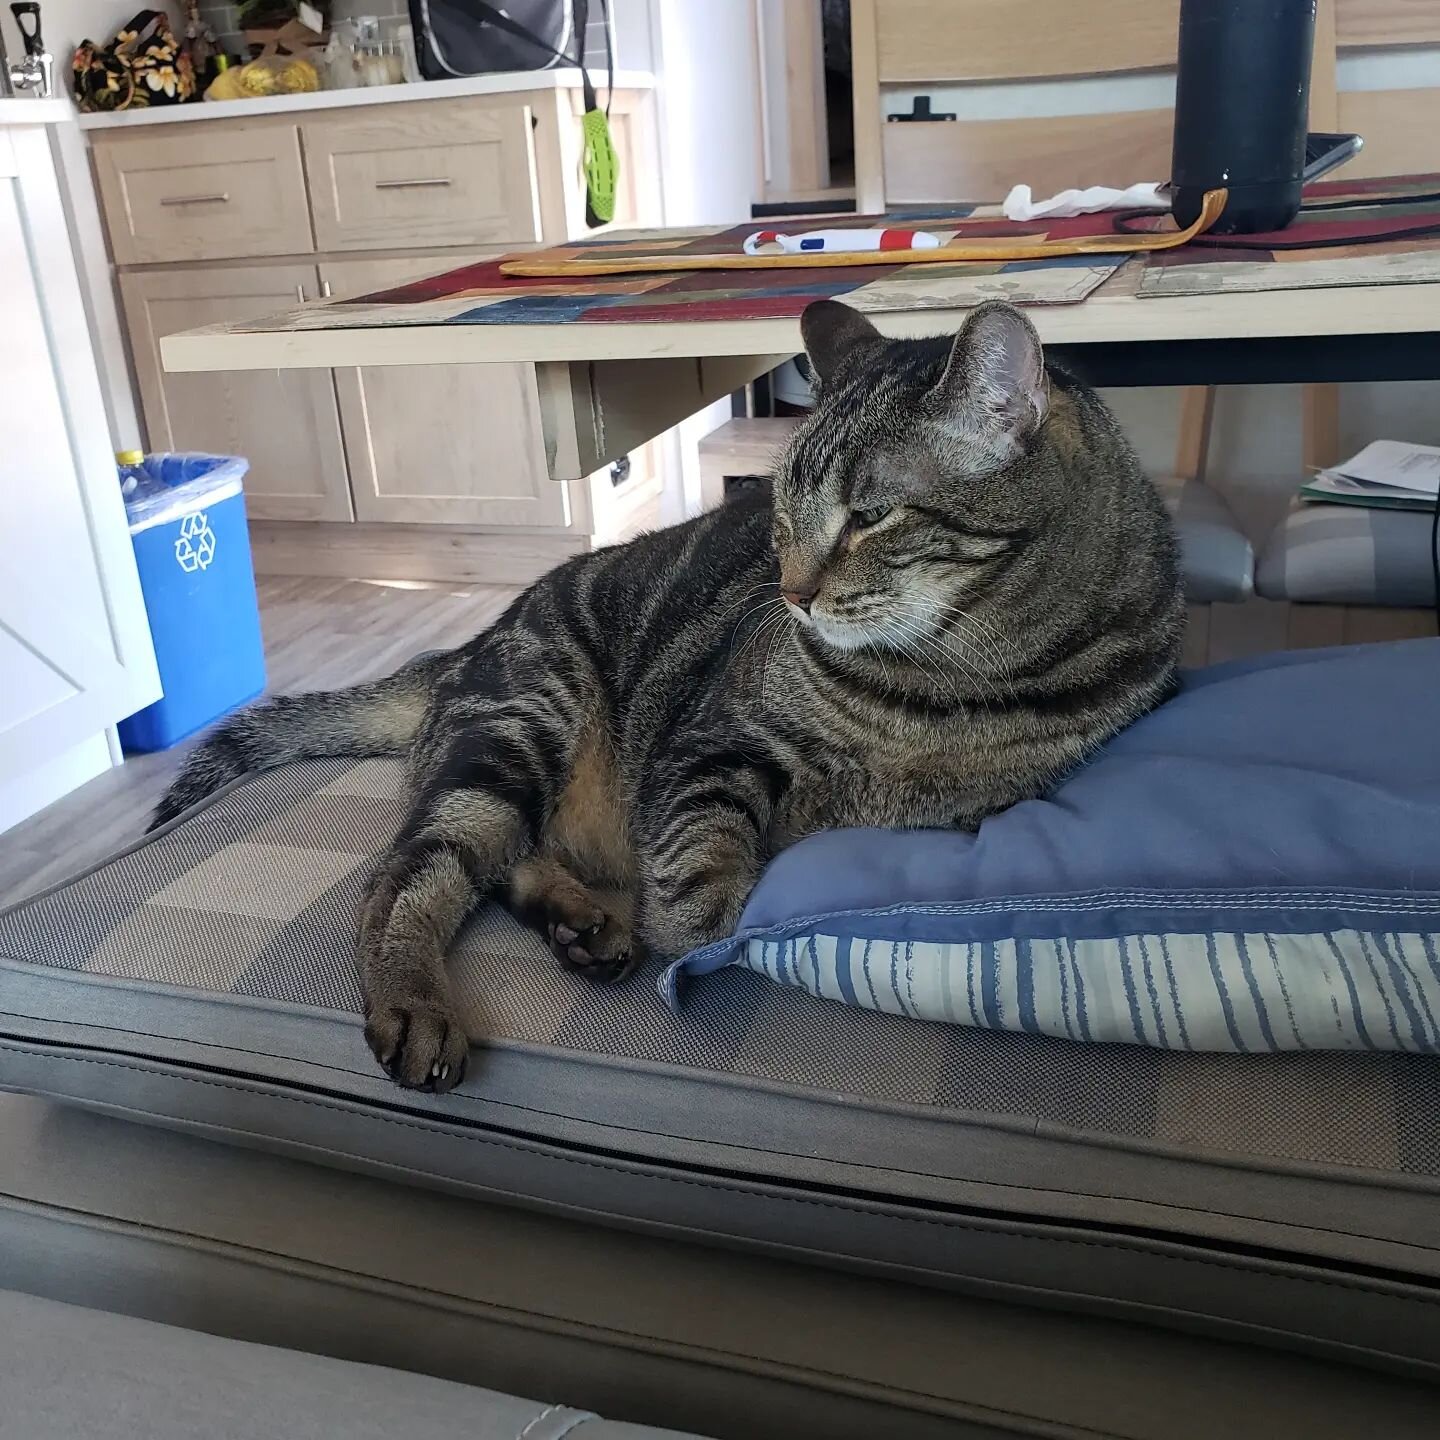 Mr Tiger the King of the 5th wheel. He had a rough afternoon so this is his ruling spot for the evening.
.
.
.
.
#livingourjourney365 #nomadicroadtravels #homeonwheels #rvlifestyle #nomads #modernrv #rvtoday #fulltimervliving #Alliancerv #AllianceAve